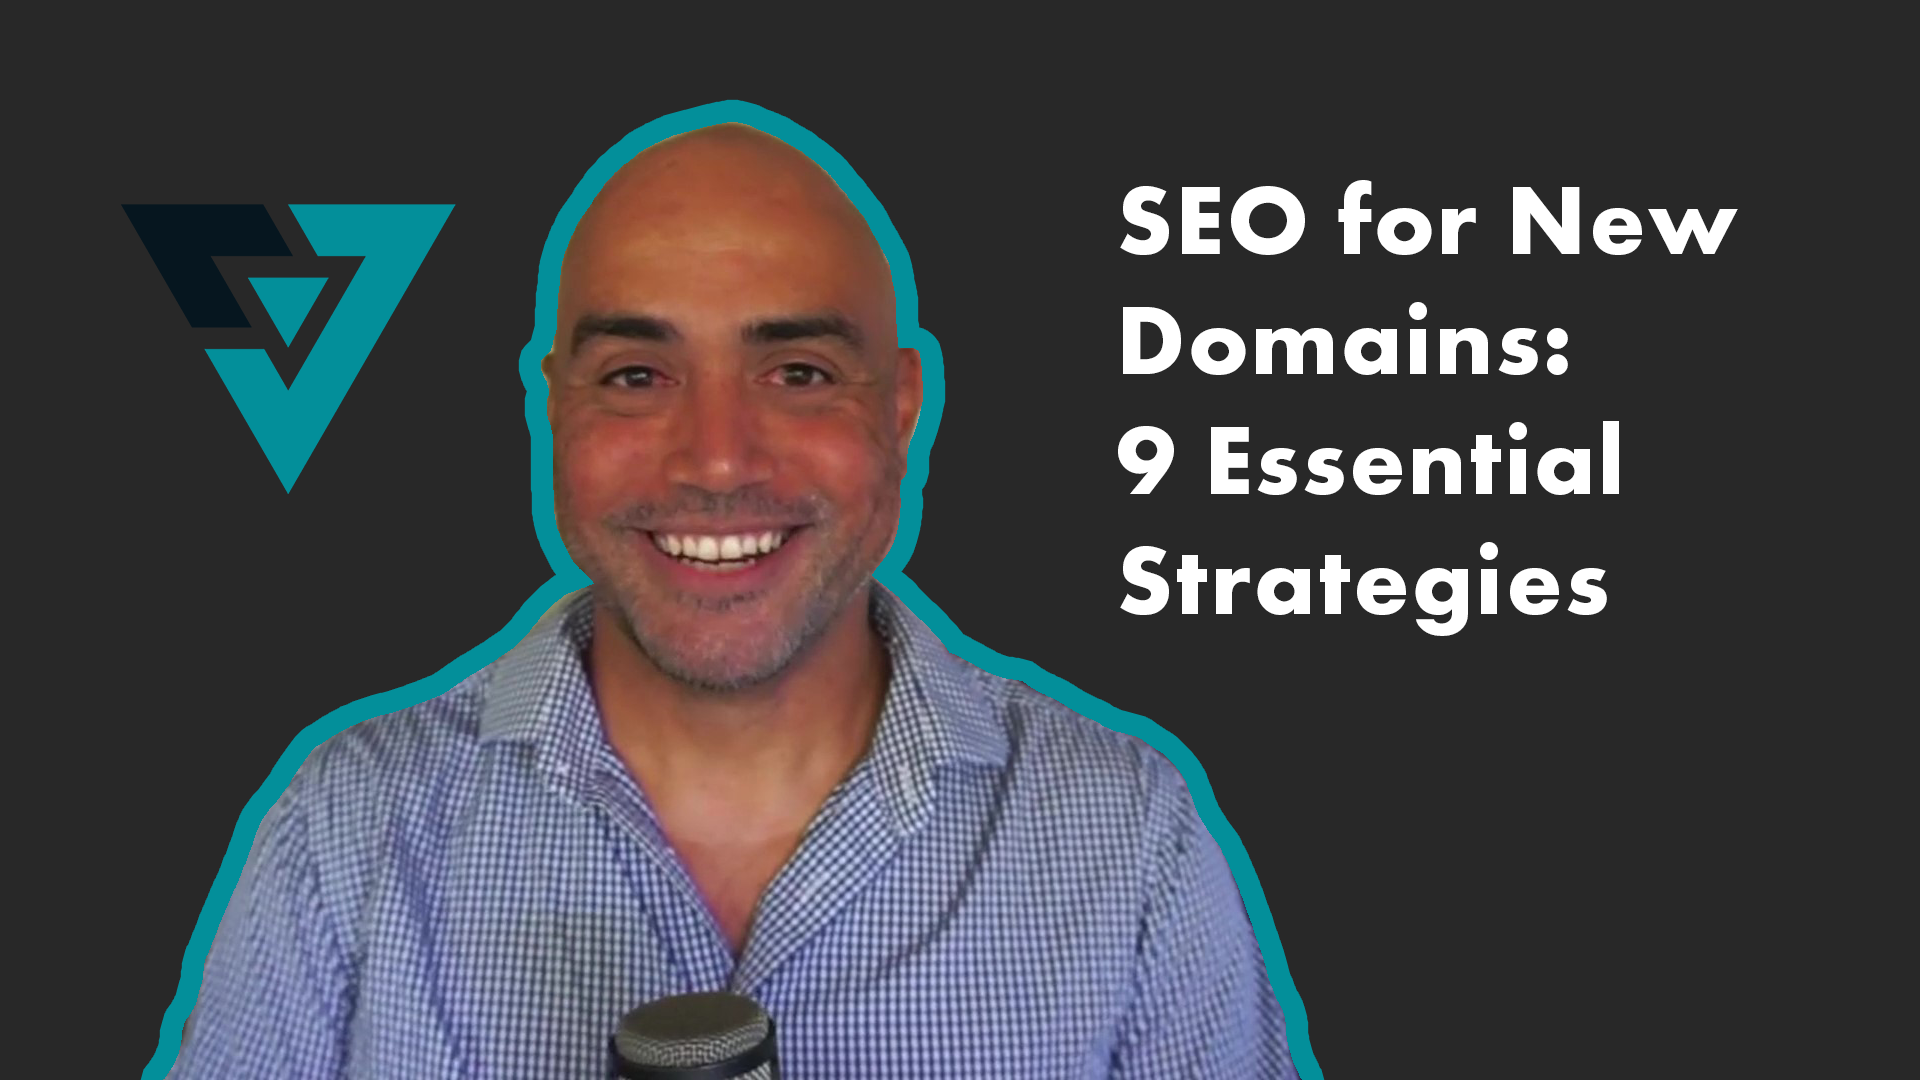 SEO for New Domains: 9 Essential Strategies